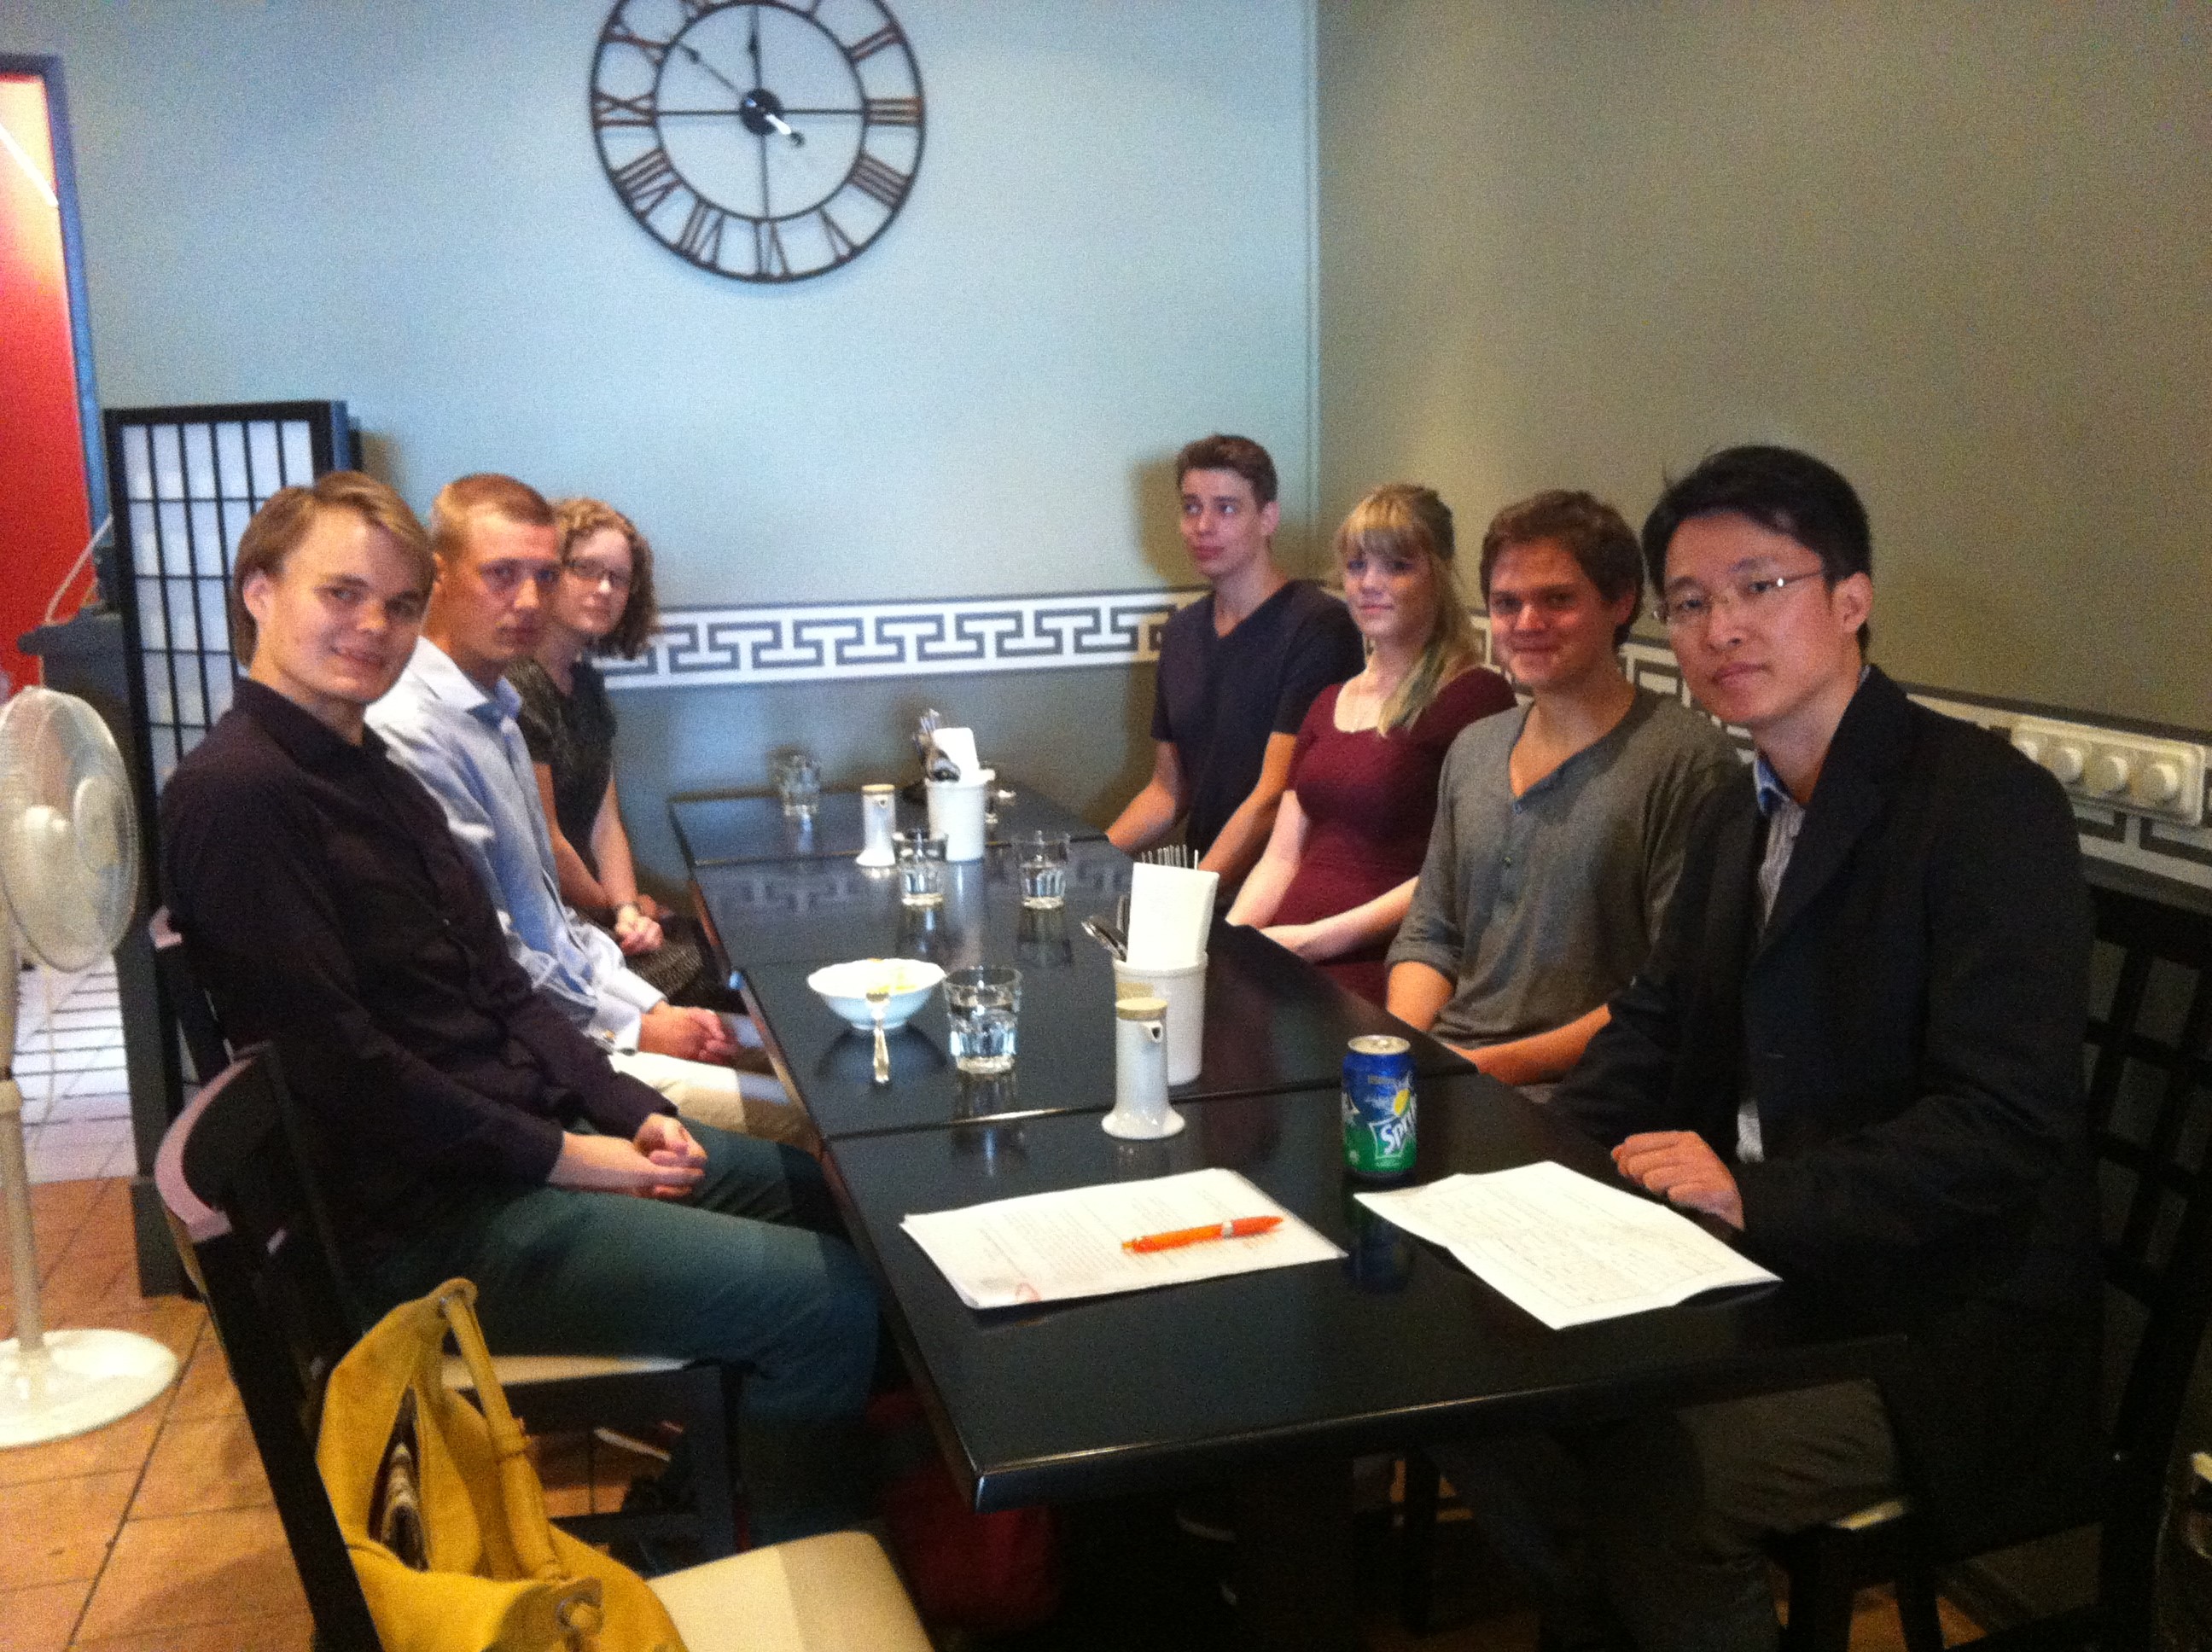 Orientation for latest Swedish recipients of Huayu Enrichment Scholarships